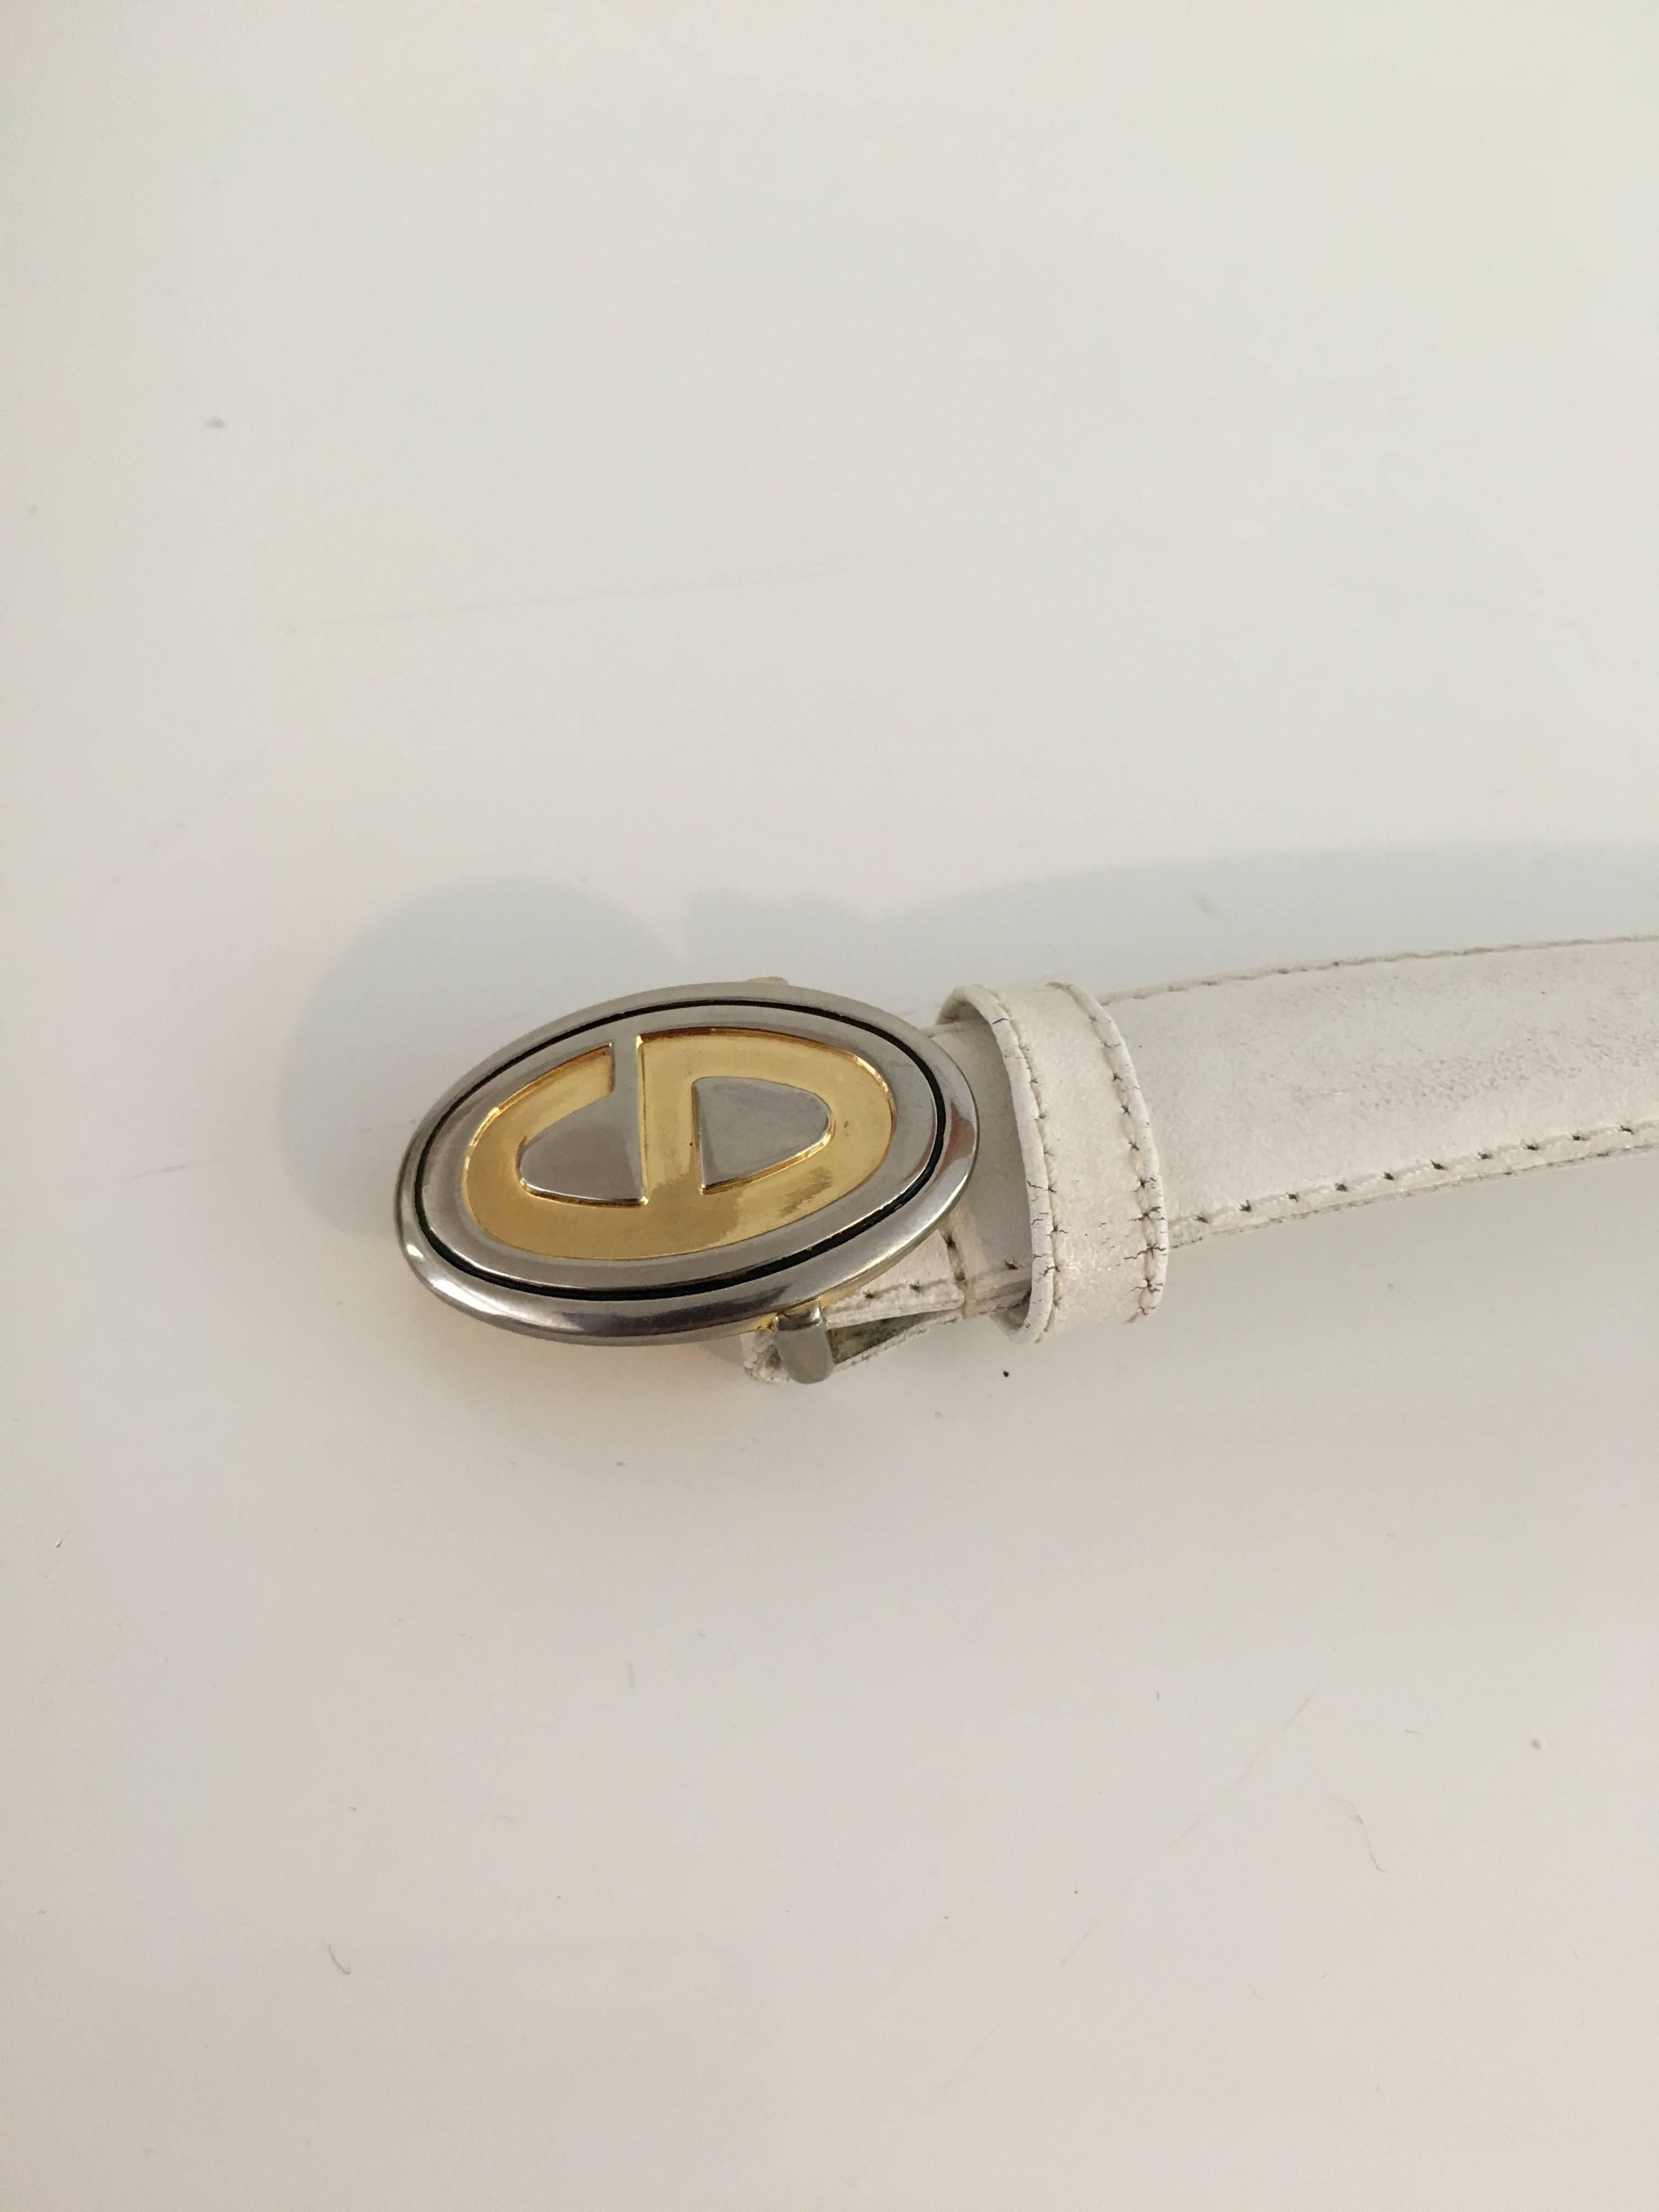 Dior Logo Buckle with White Leather Strap, 1980s   In Good Condition For Sale In Atlanta, GA